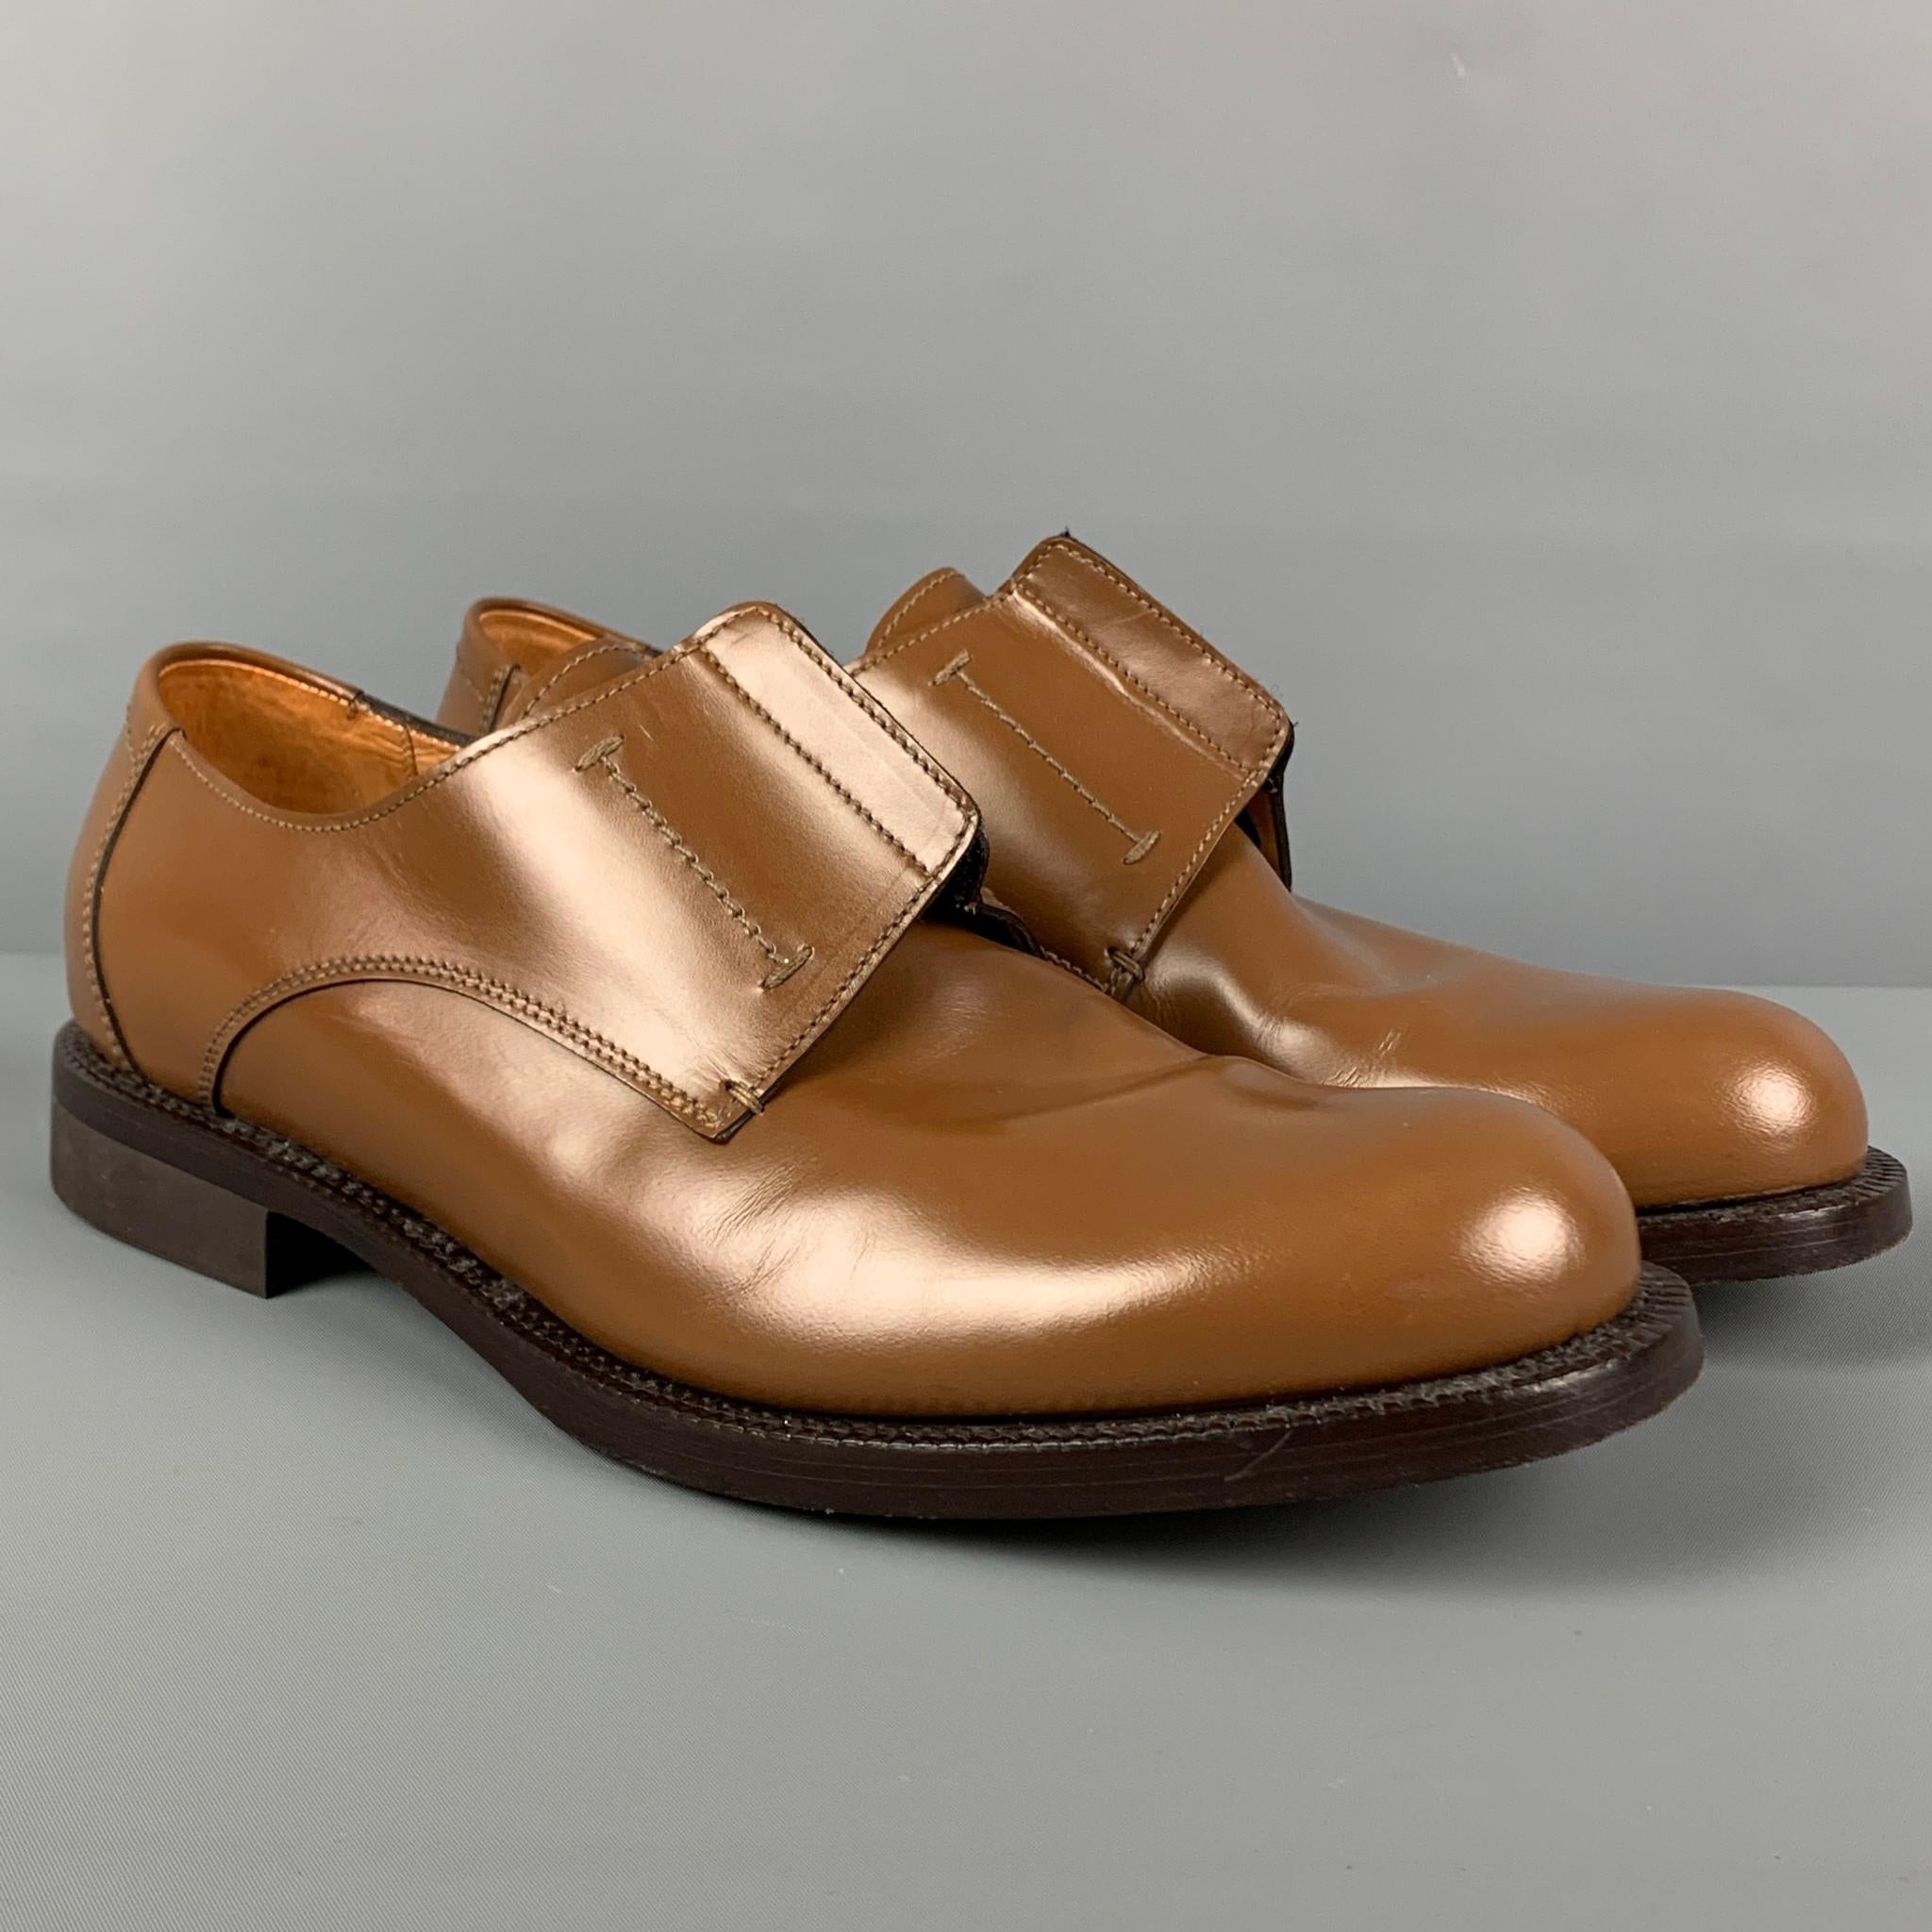 JIL SANDER x RAF SIMONS dress shoes comes in a tan leather featuring a elastic detail, round toe, and a laceless closure. Made in Italy. 

Very Good Pre-Owned Condition.
Marked: 1 0029 10

Outsole: 12.75 in. x 4.5 in. 